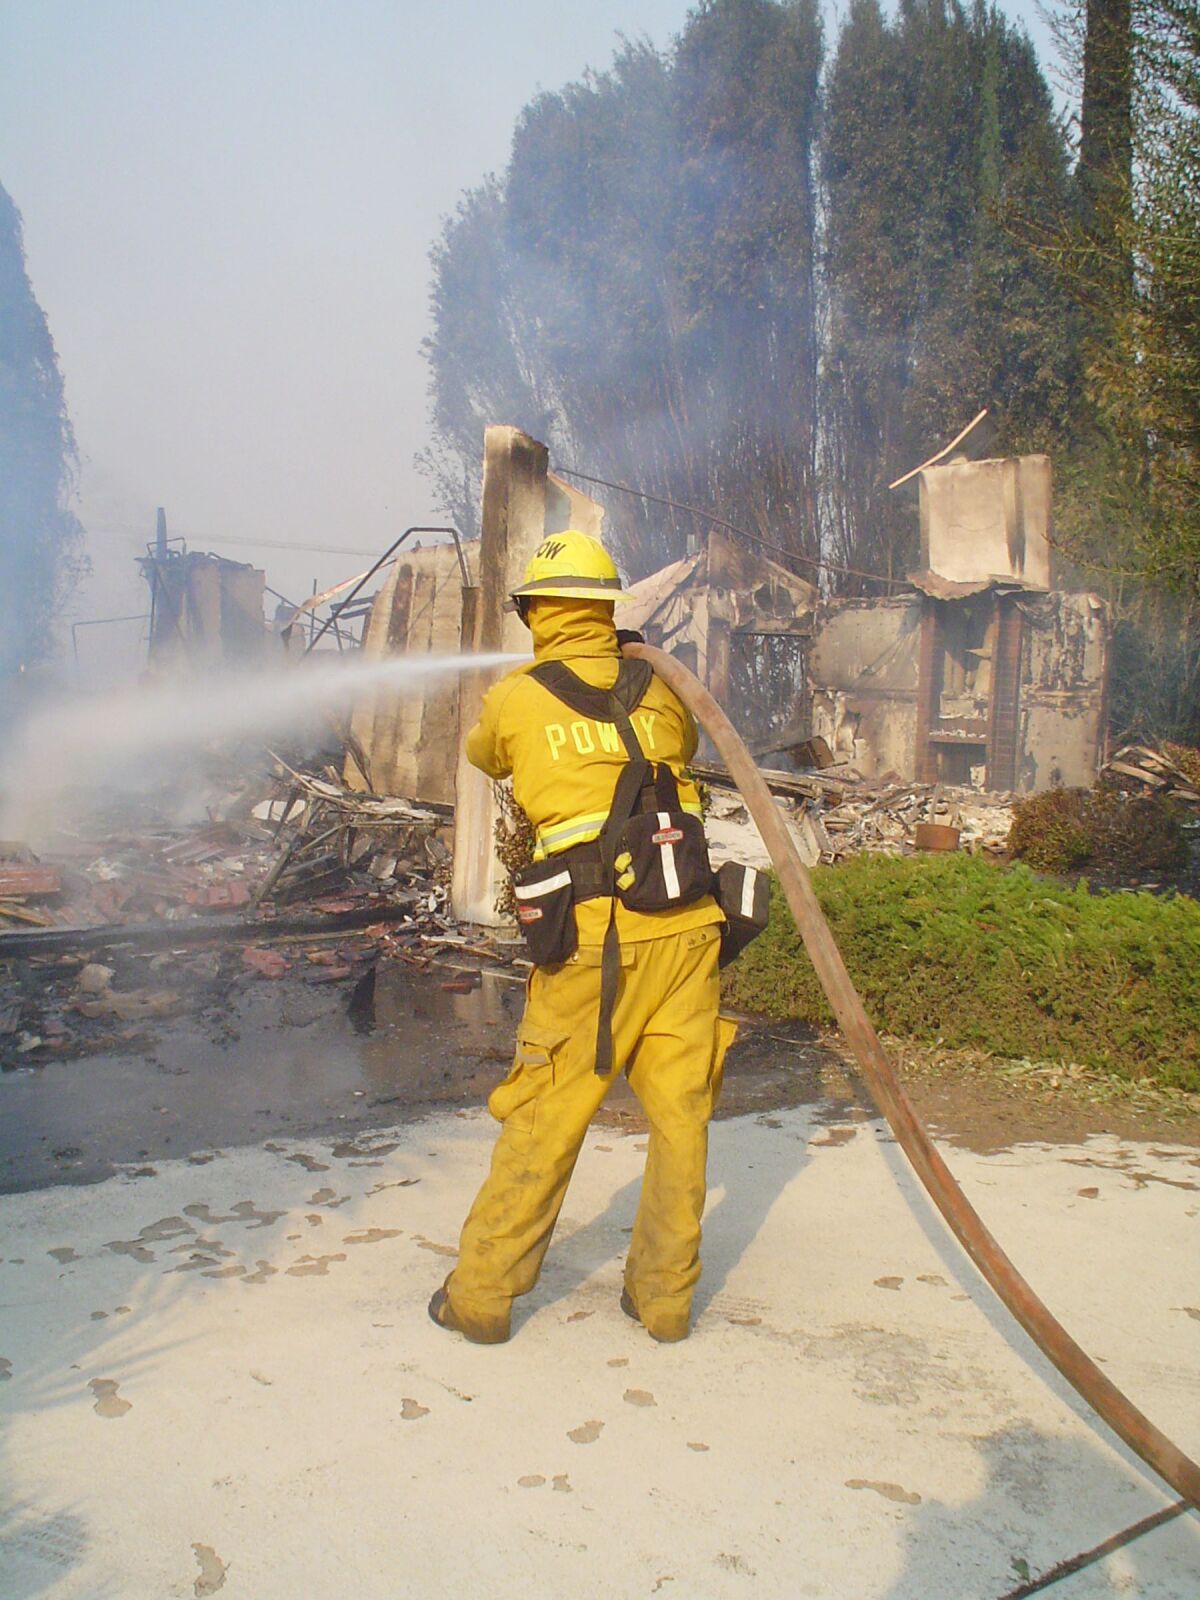 A Poway firefighter at a burning home during the Witch Creek fire in 2007.